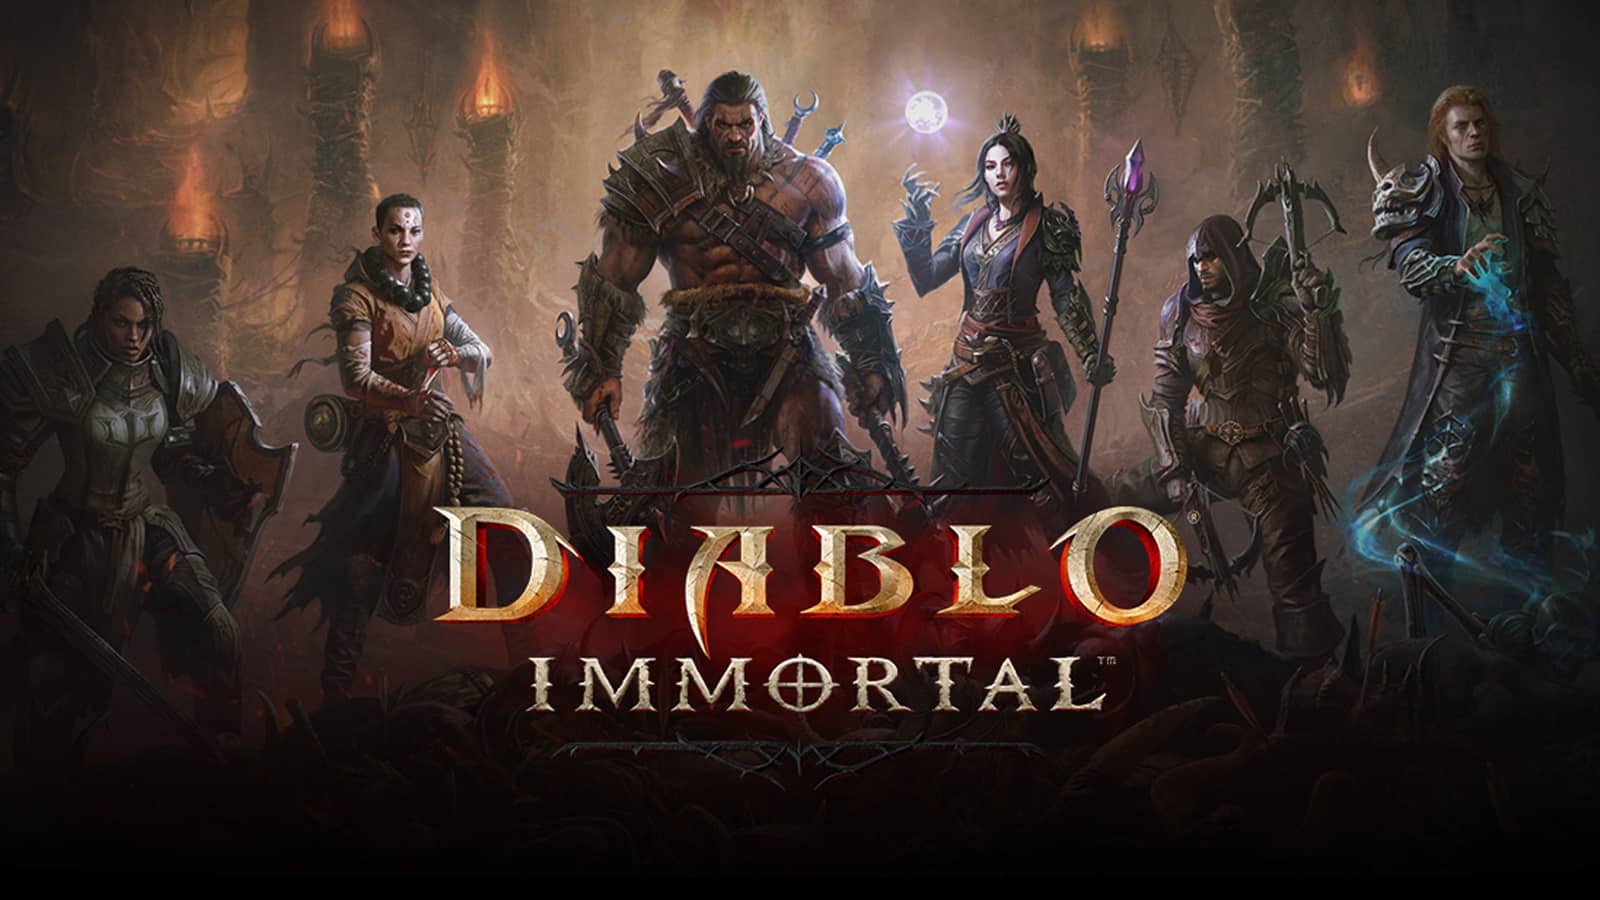 Diablo Immortal will be a free-to-play ARPG by Blizzard